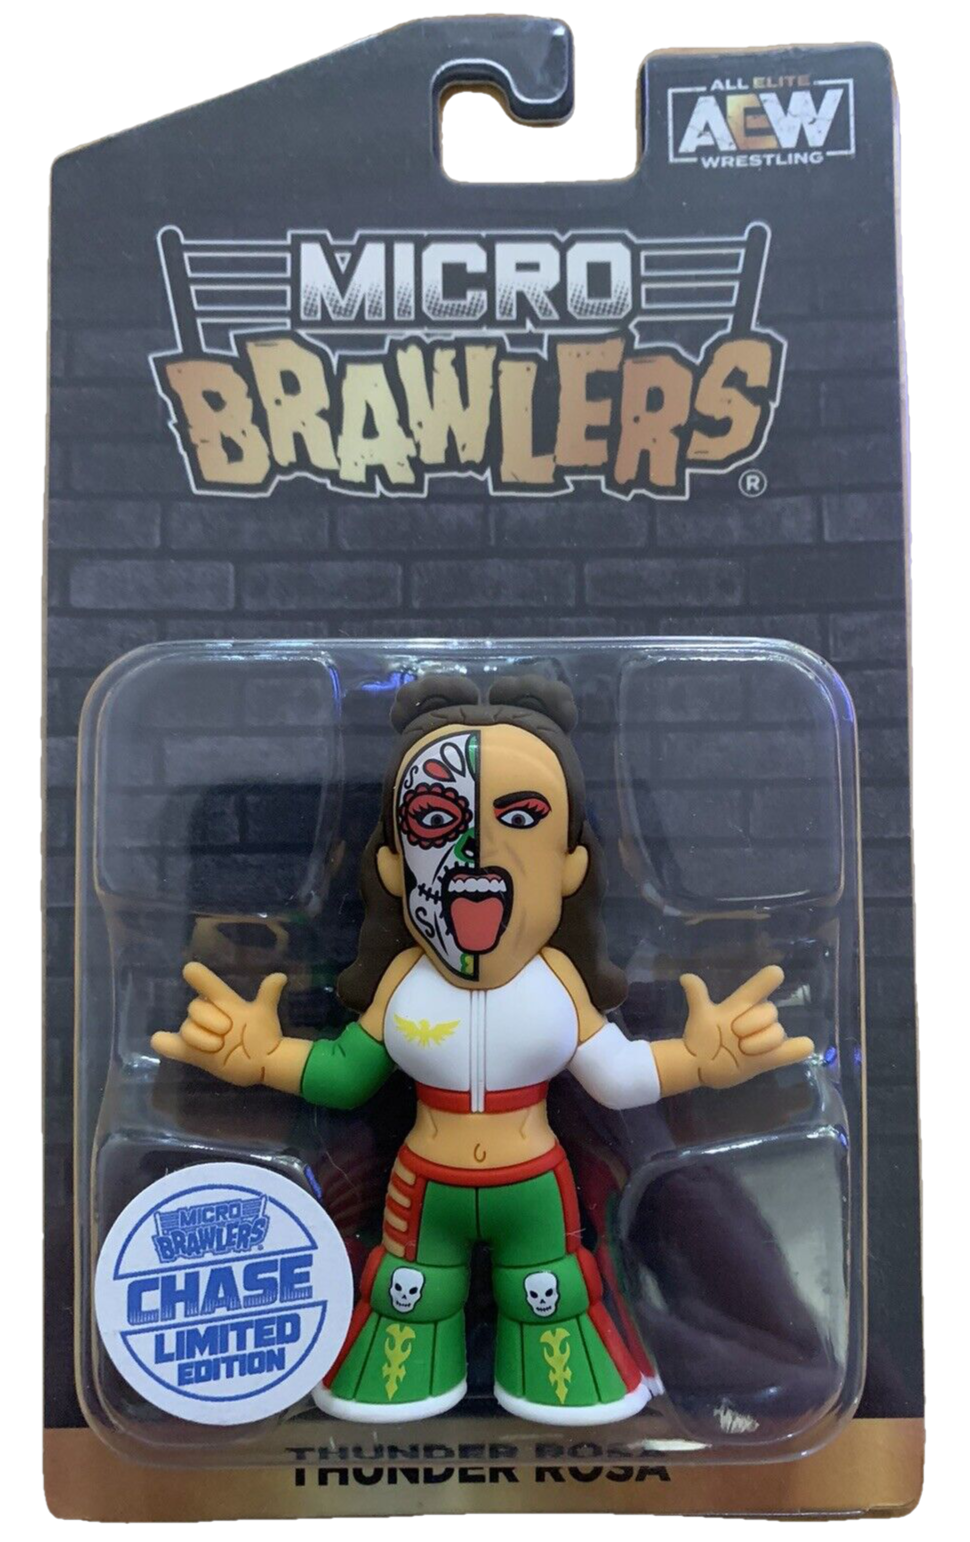 Pro Wrestling Tees on X: December's True Mystery Holiday edition of  @PWCrate includes a Santahausen Micro Brawler! Here's a sneak peek  including the Chase variant! Sign up now so that you can